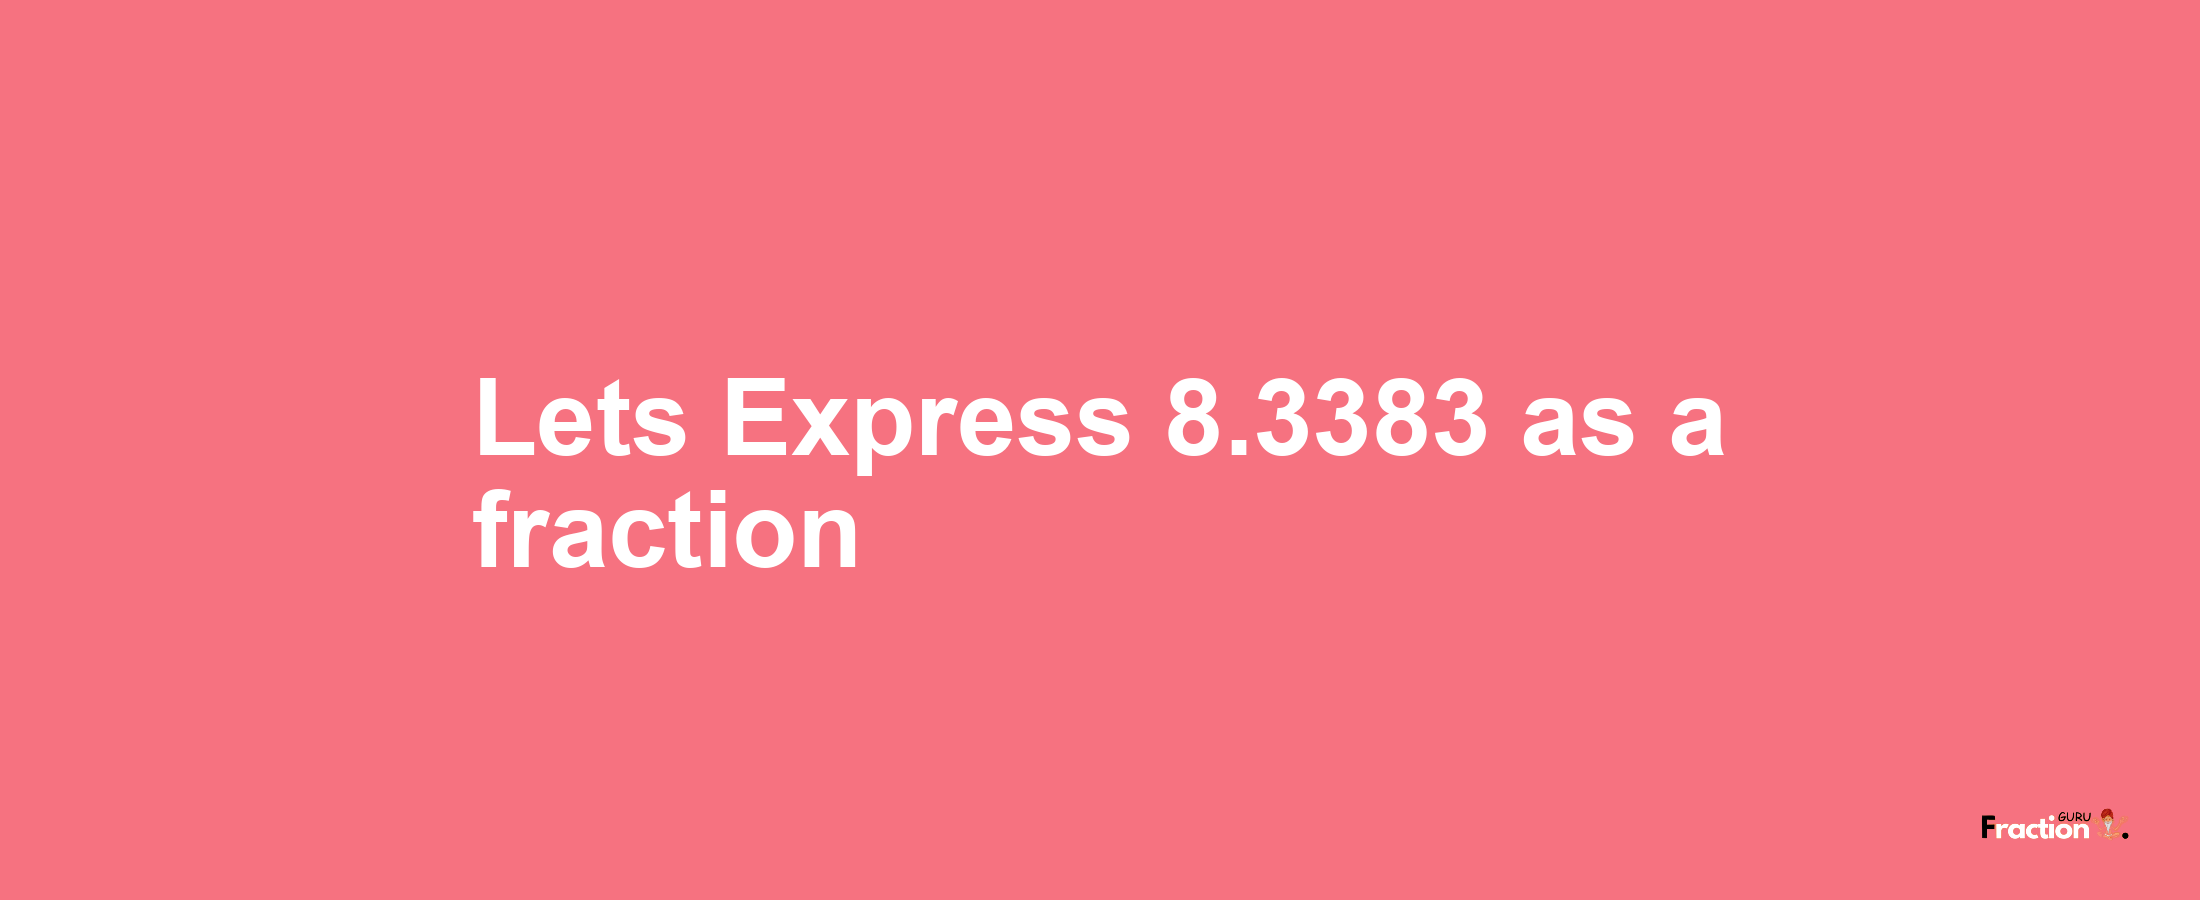 Lets Express 8.3383 as afraction